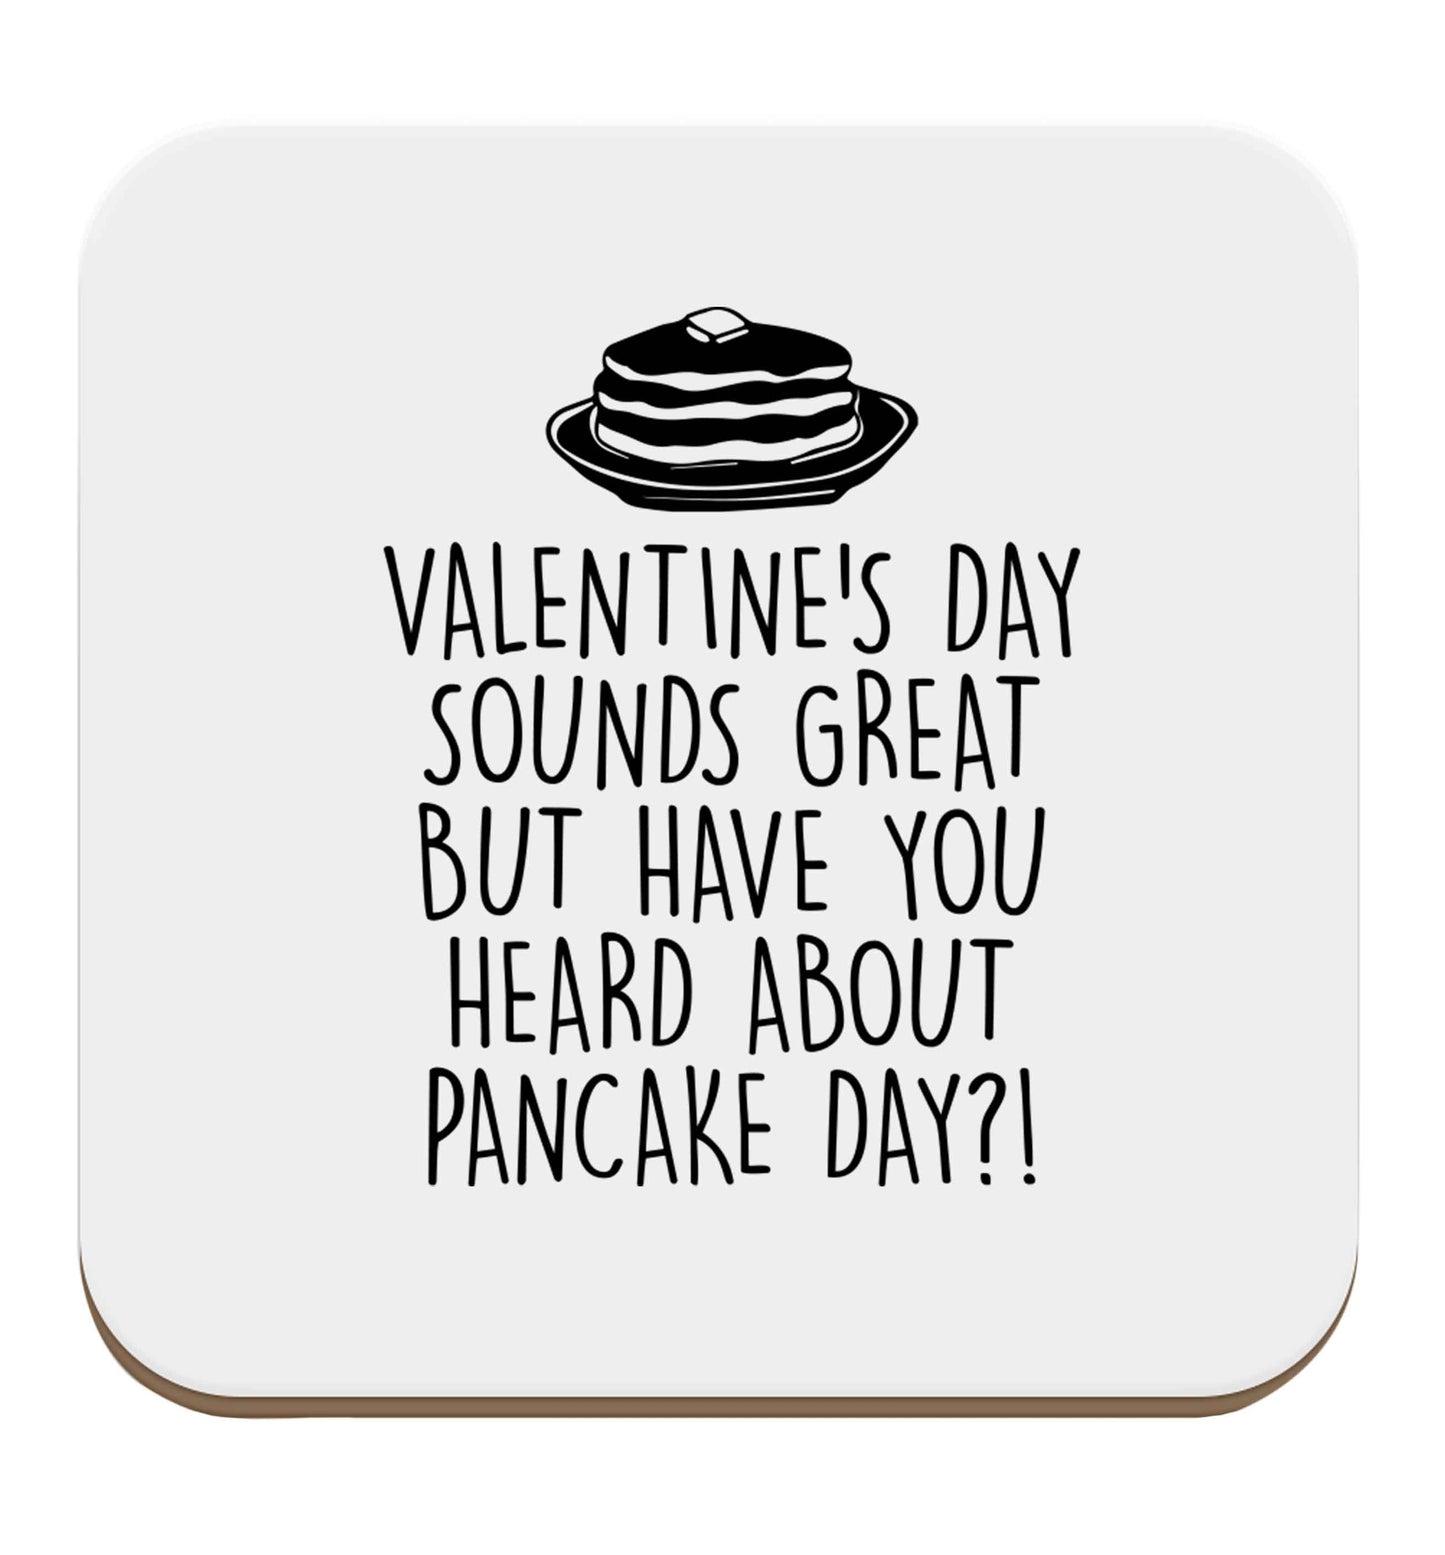 Valentine's day sounds great but have you heard about pancake day?! set of four coasters